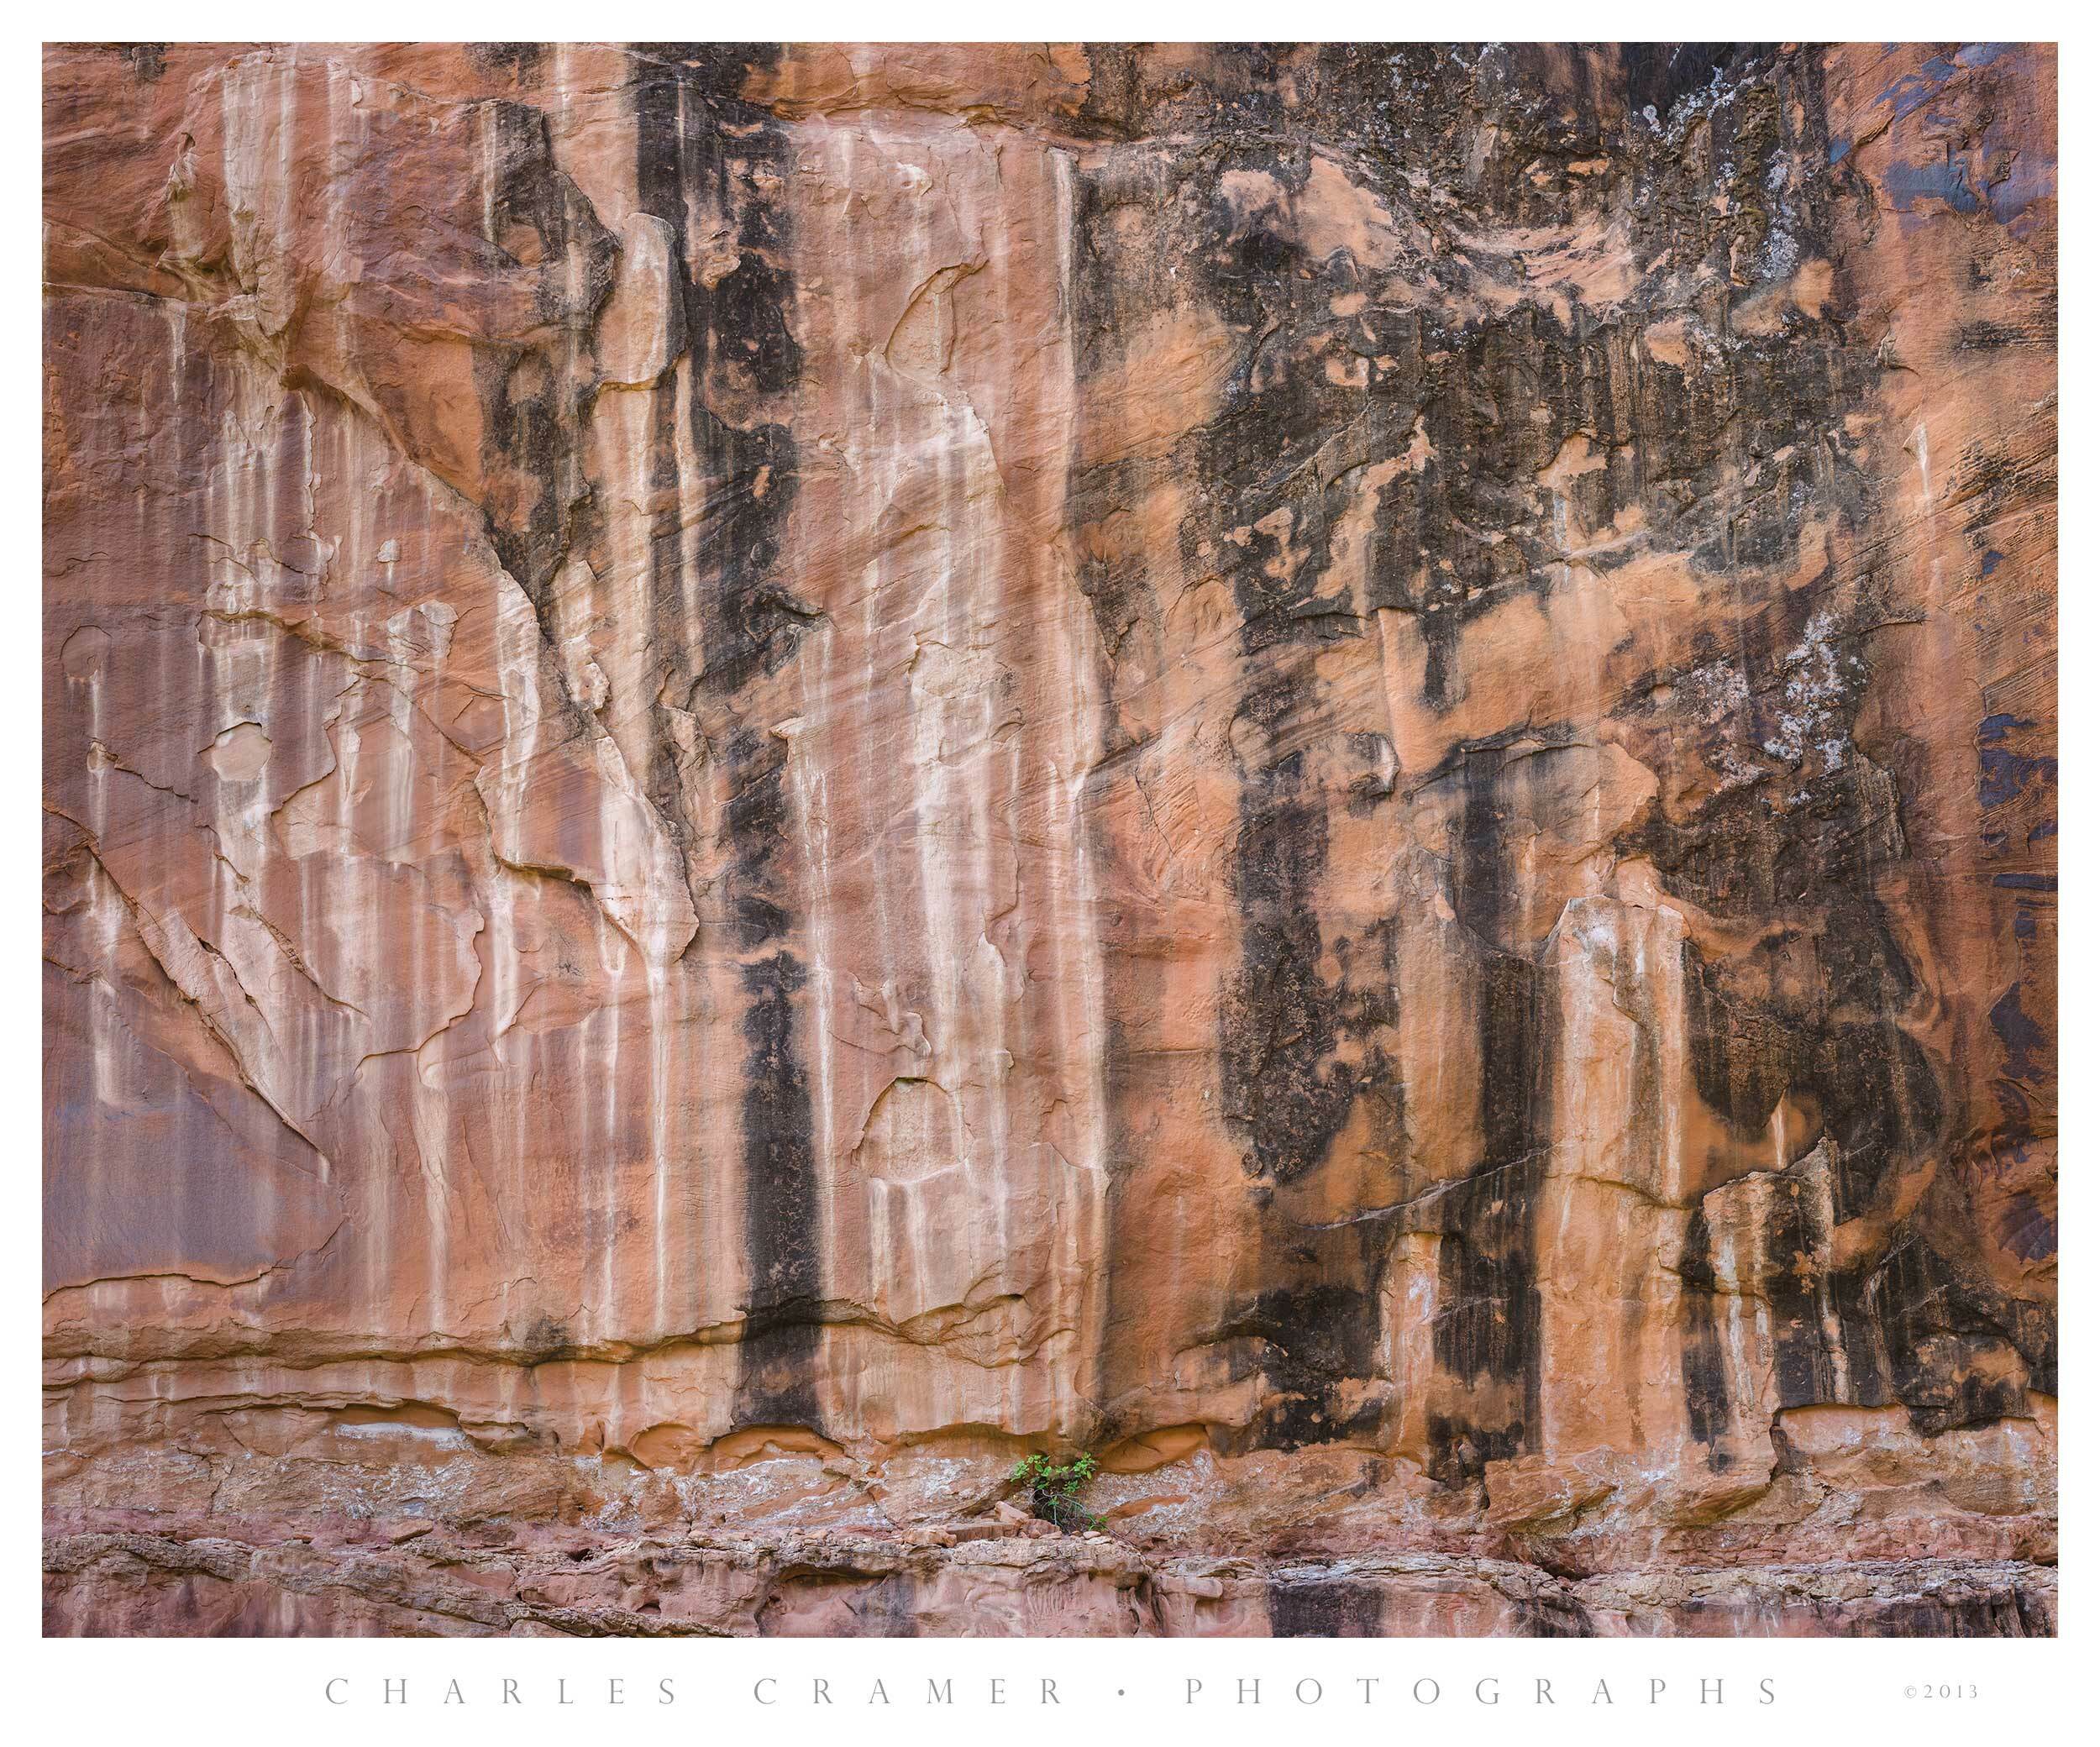 Escalante Canyon Wall with Shrub, Water Stains, Utah